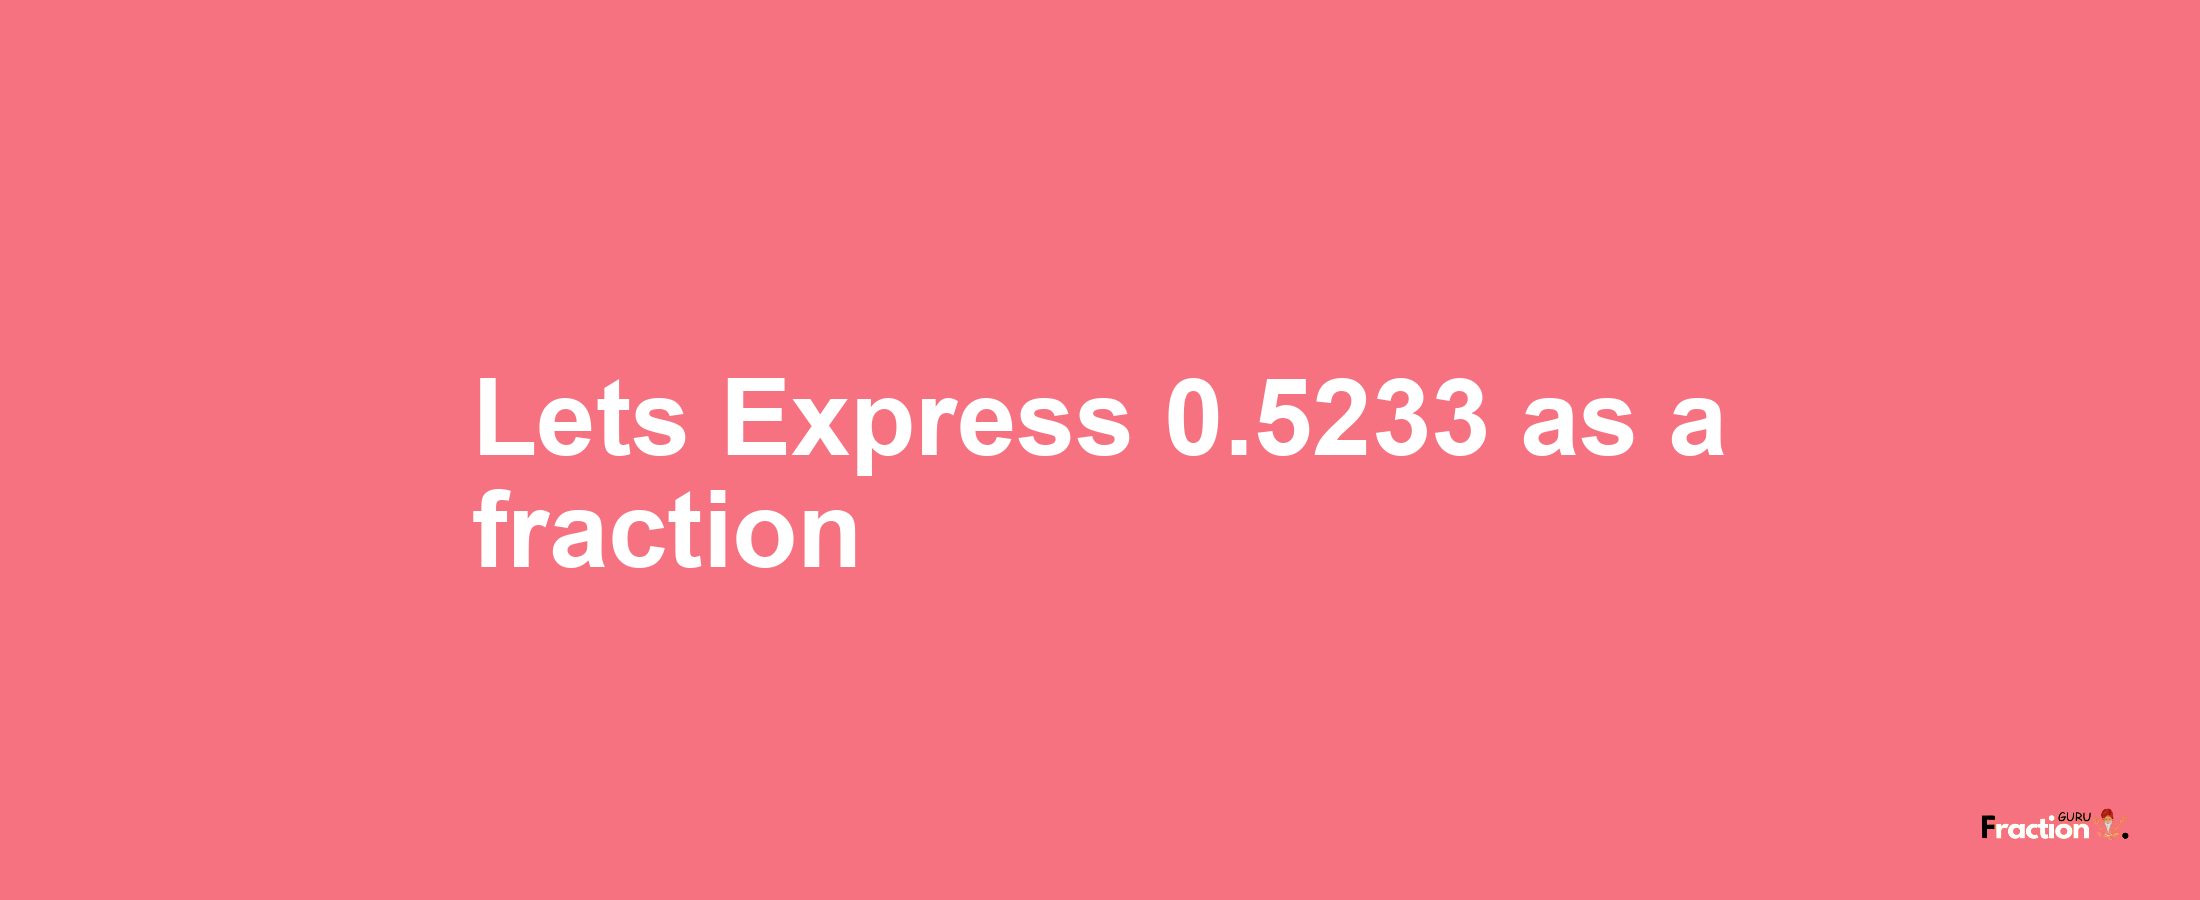 Lets Express 0.5233 as afraction